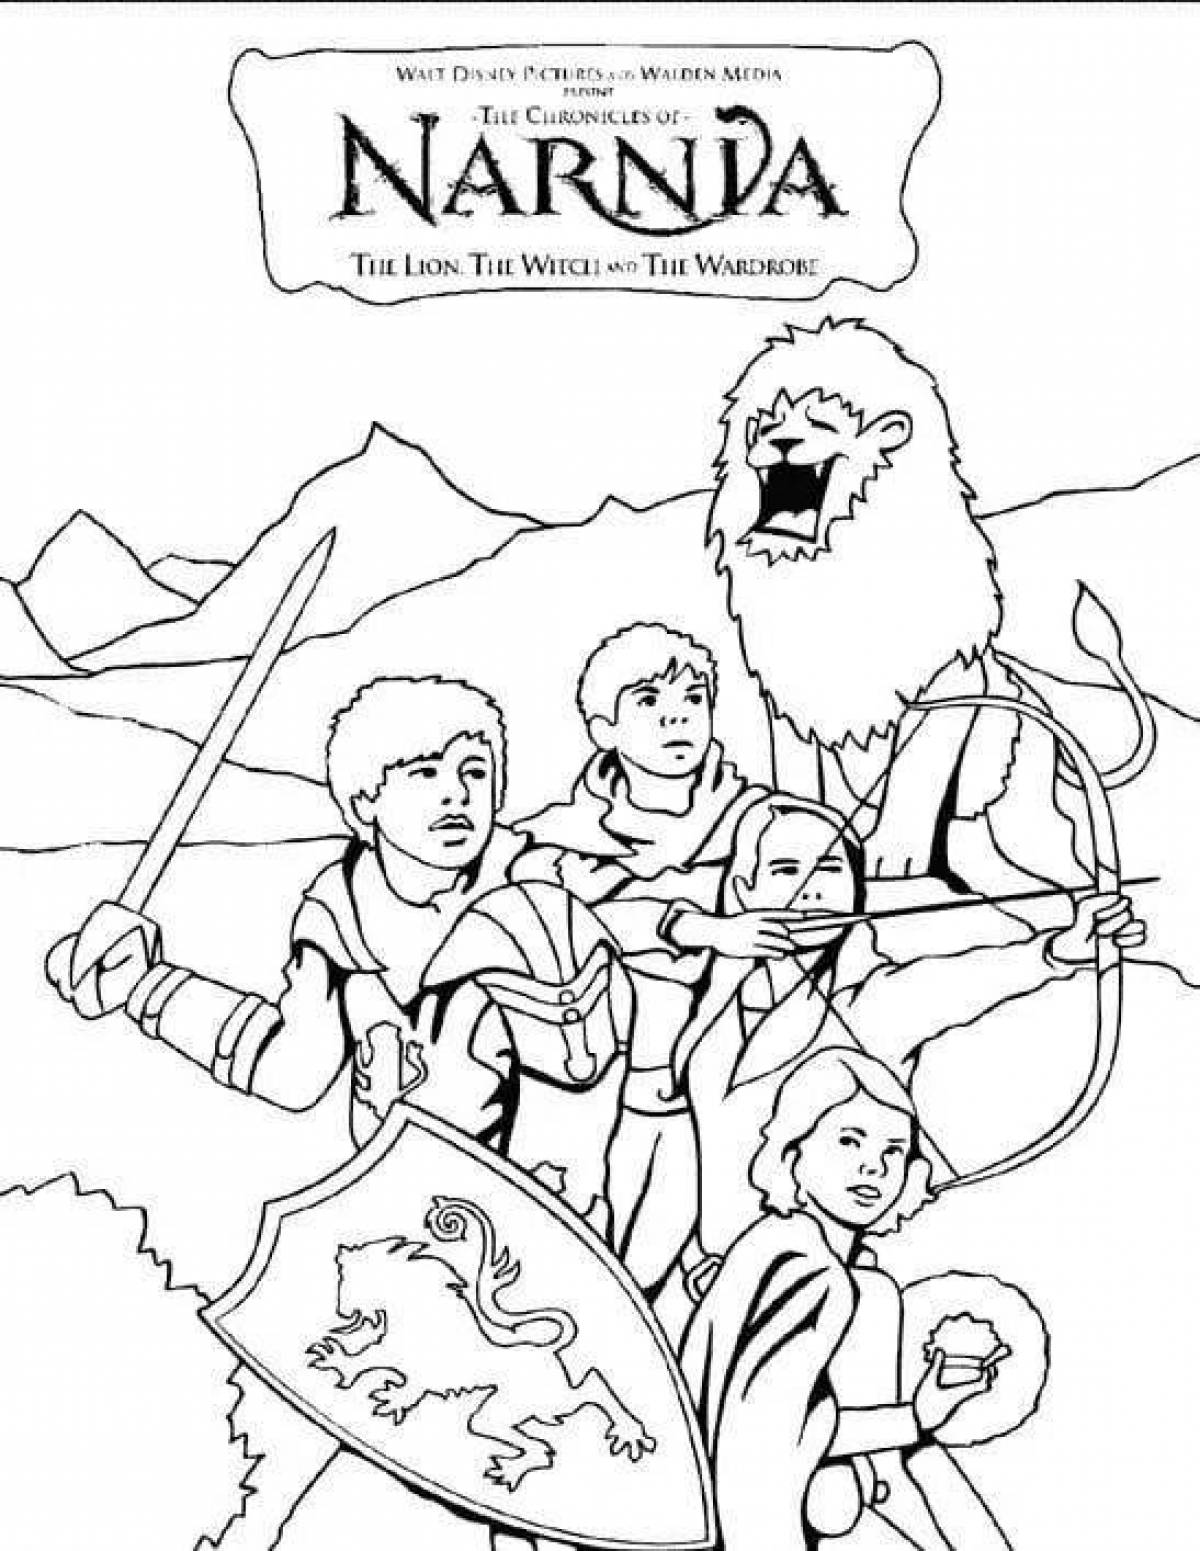 Adorable Chronicles of Narnia Coloring Page